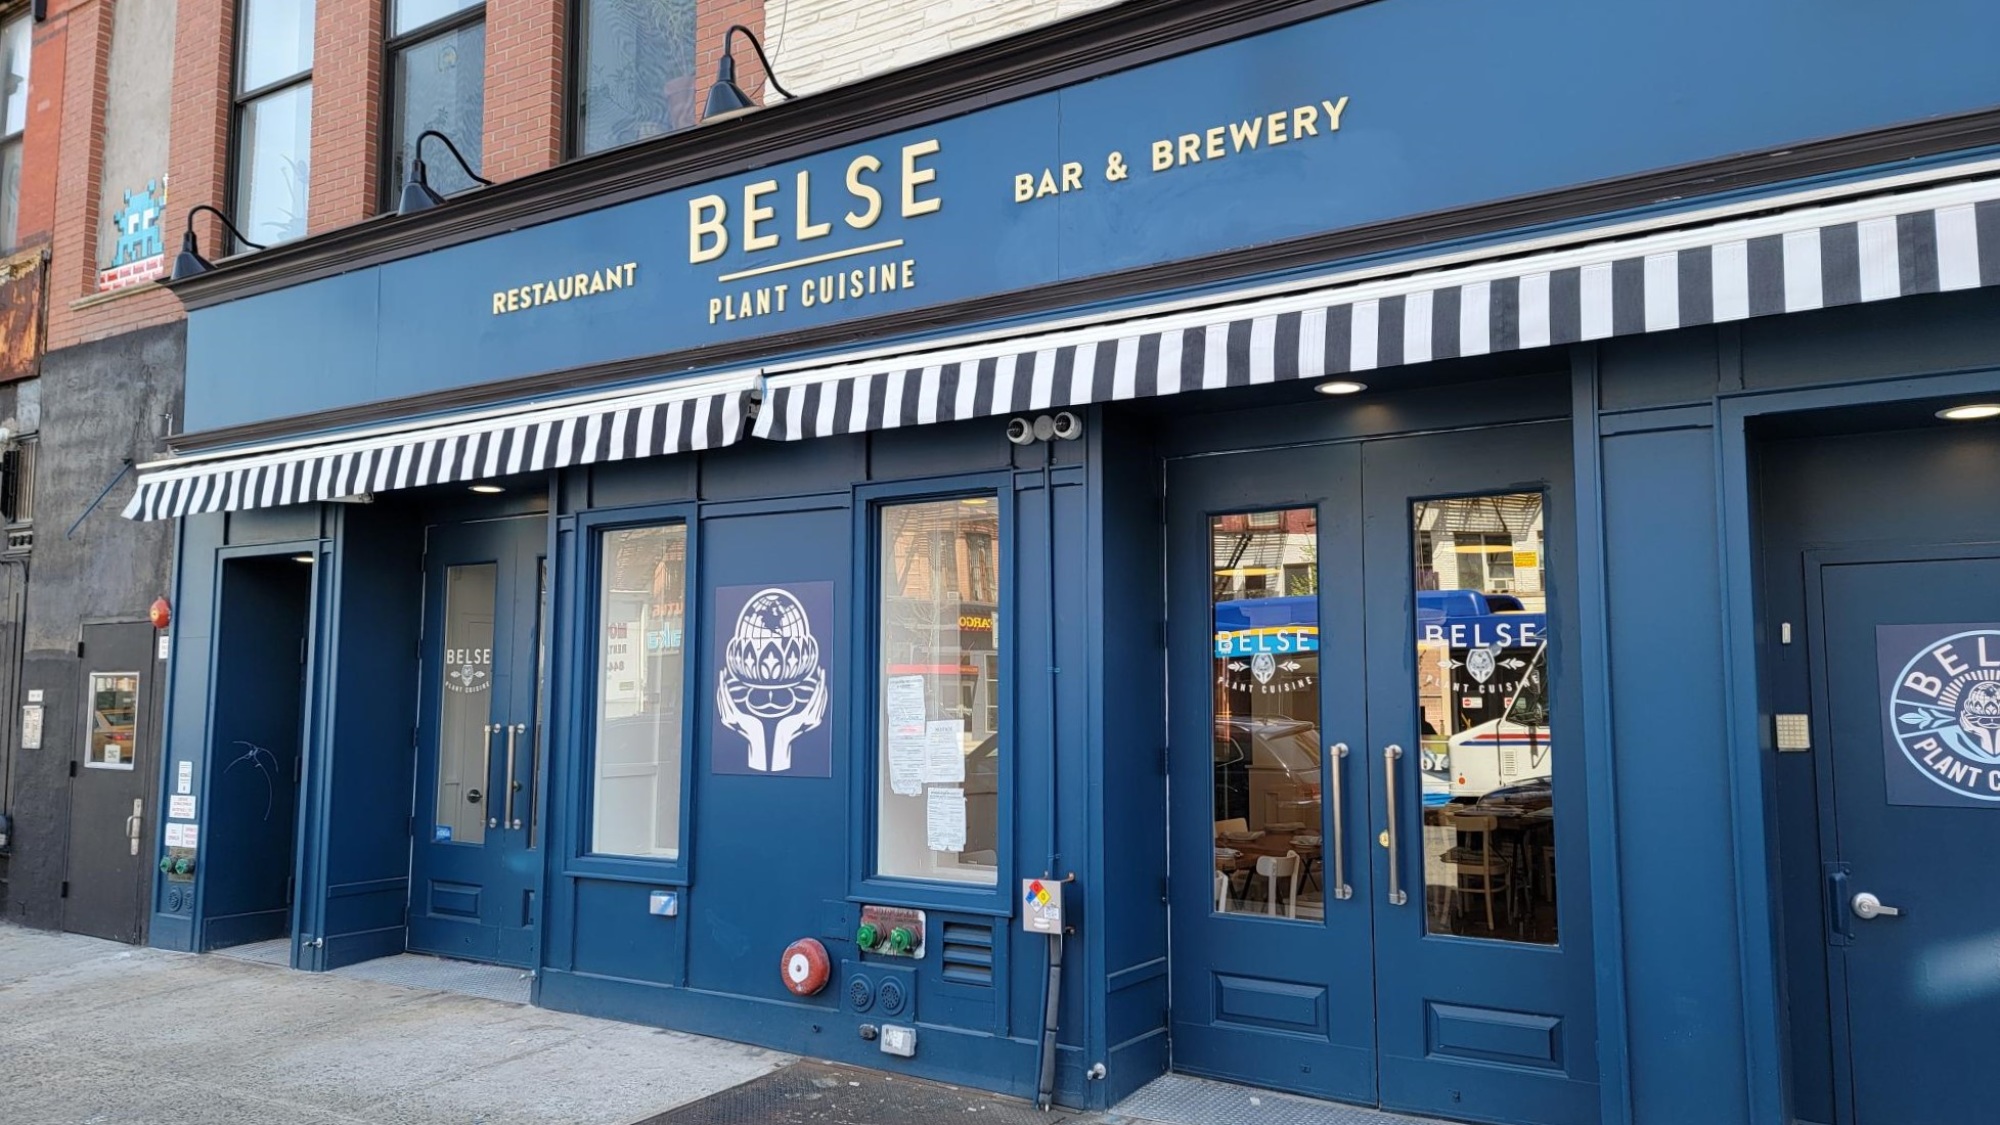 The exterior of Belse, a vegan restaurant and brewery that opened in June on the Bowery.